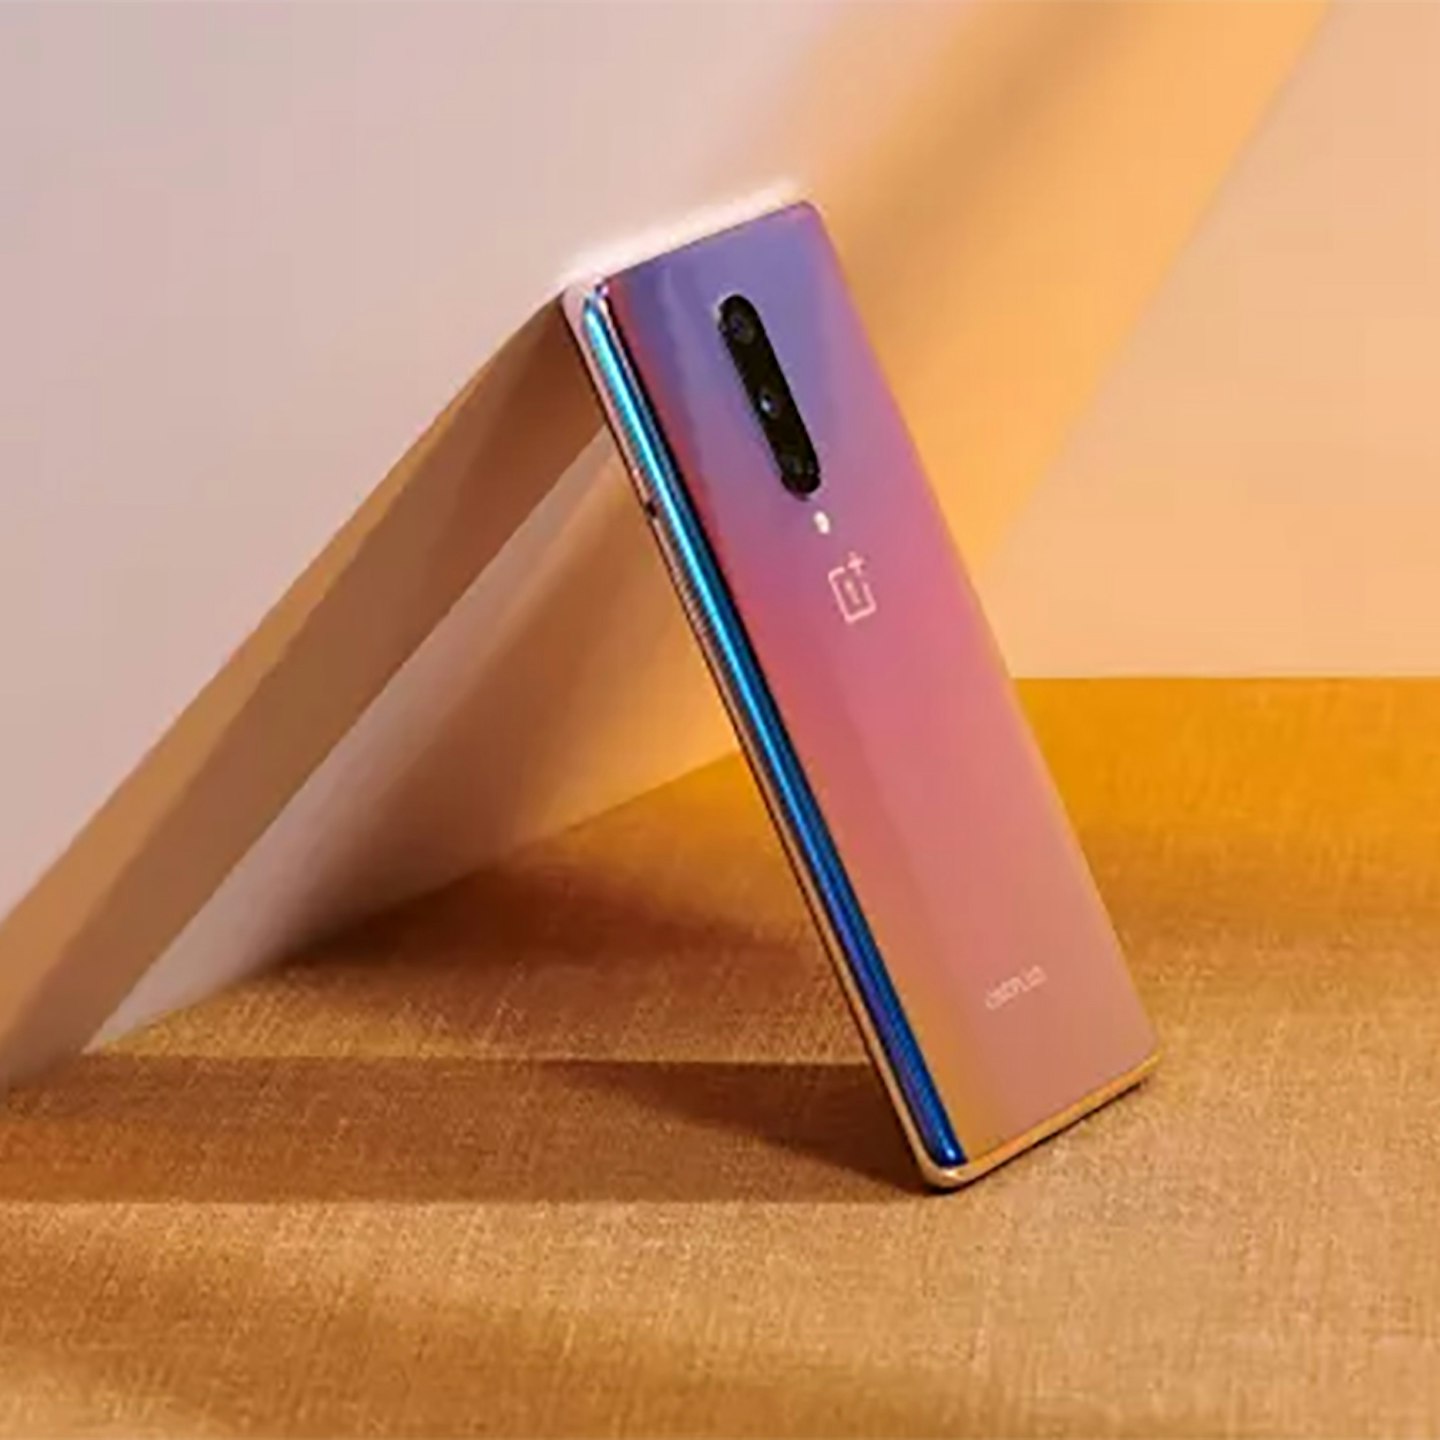 The OnePlus 8T